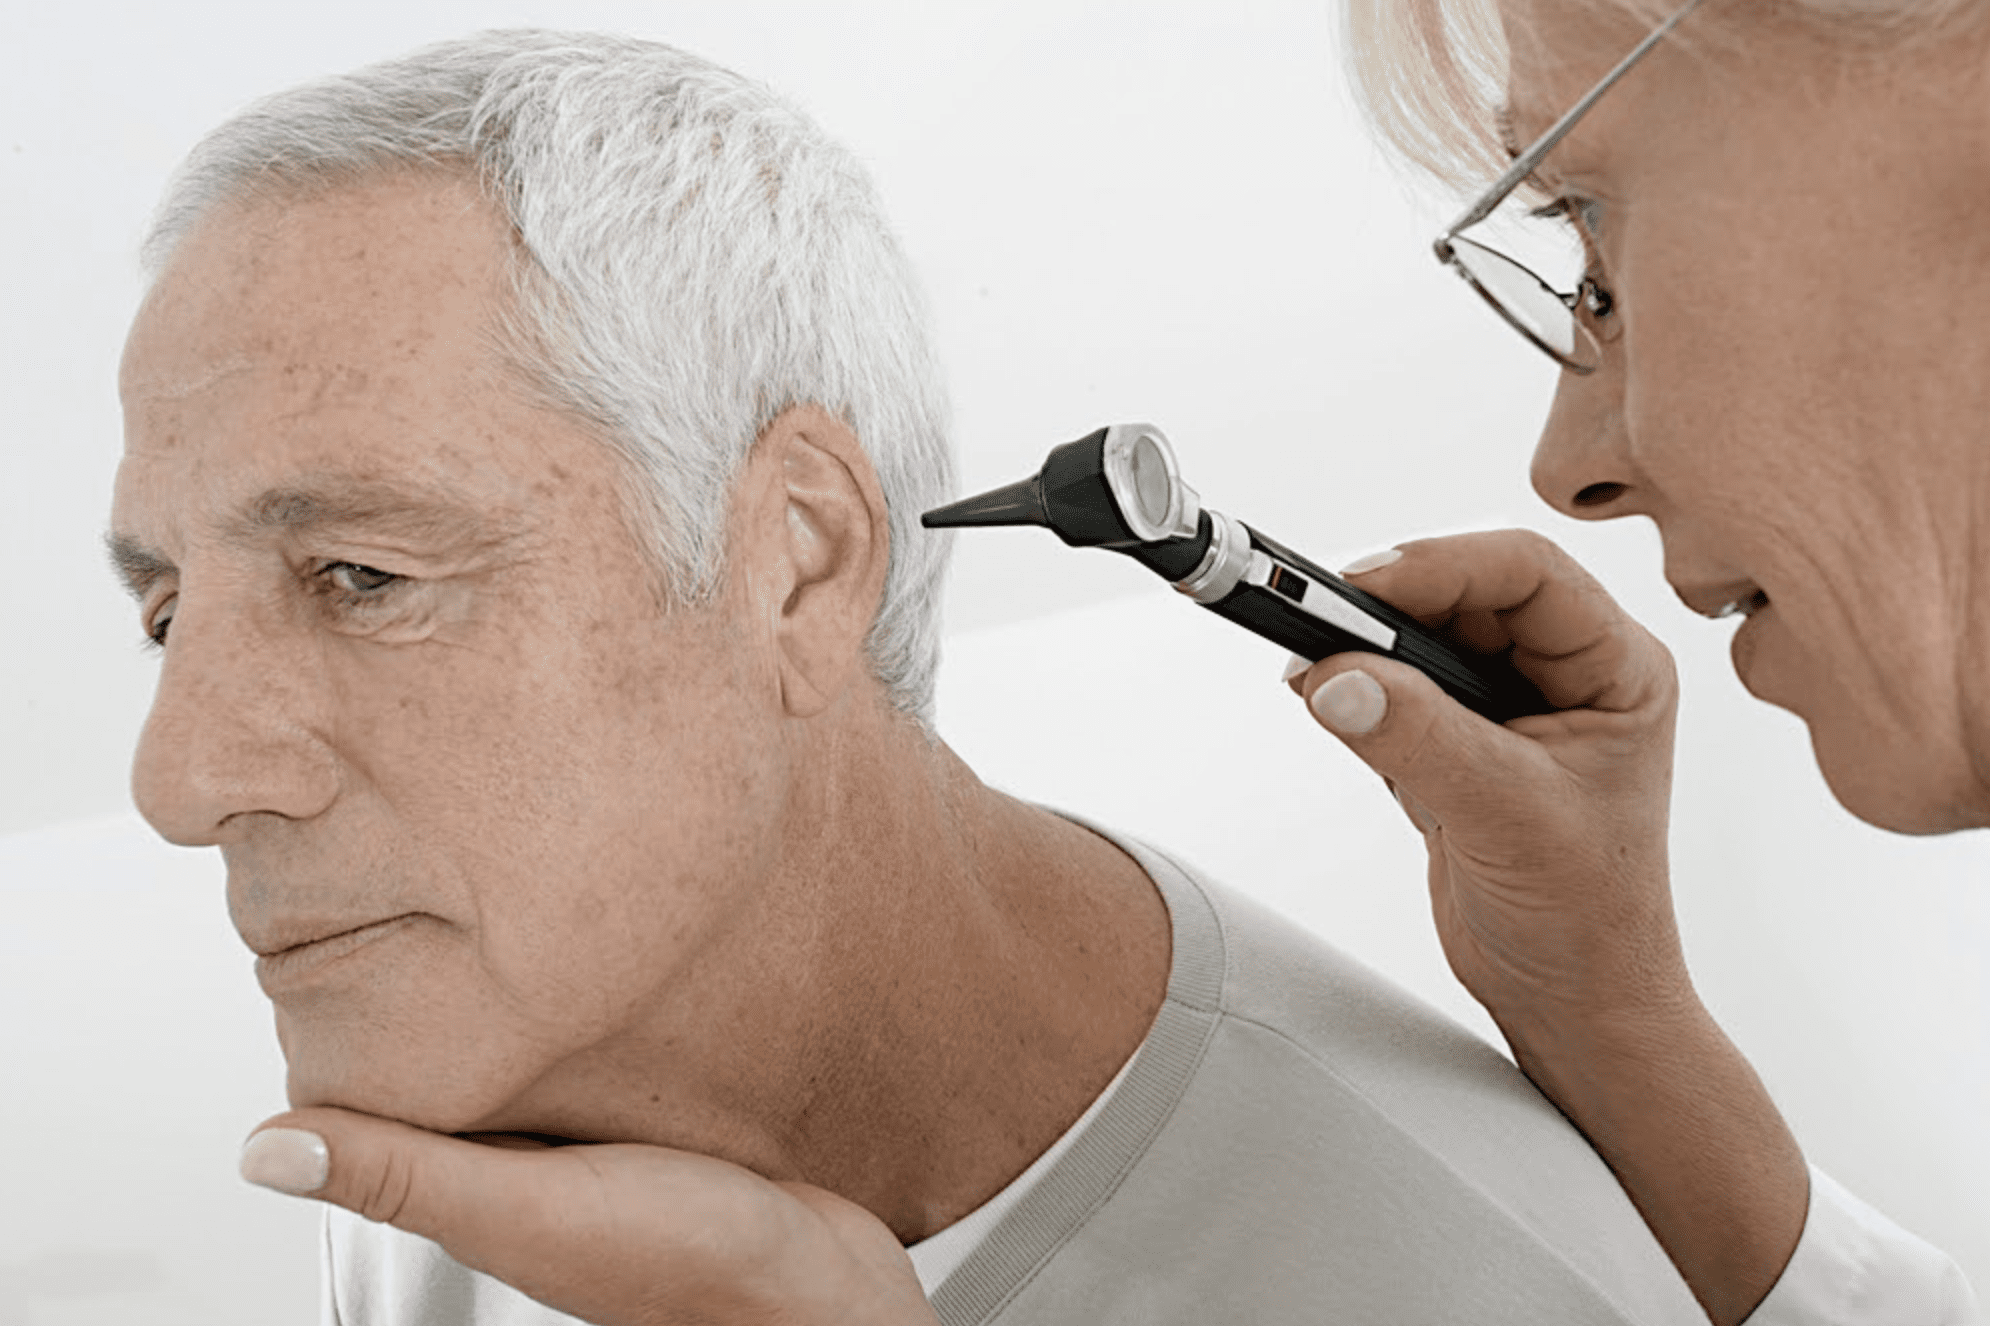 How Do You Know If You Ruptured Your Eardrum?